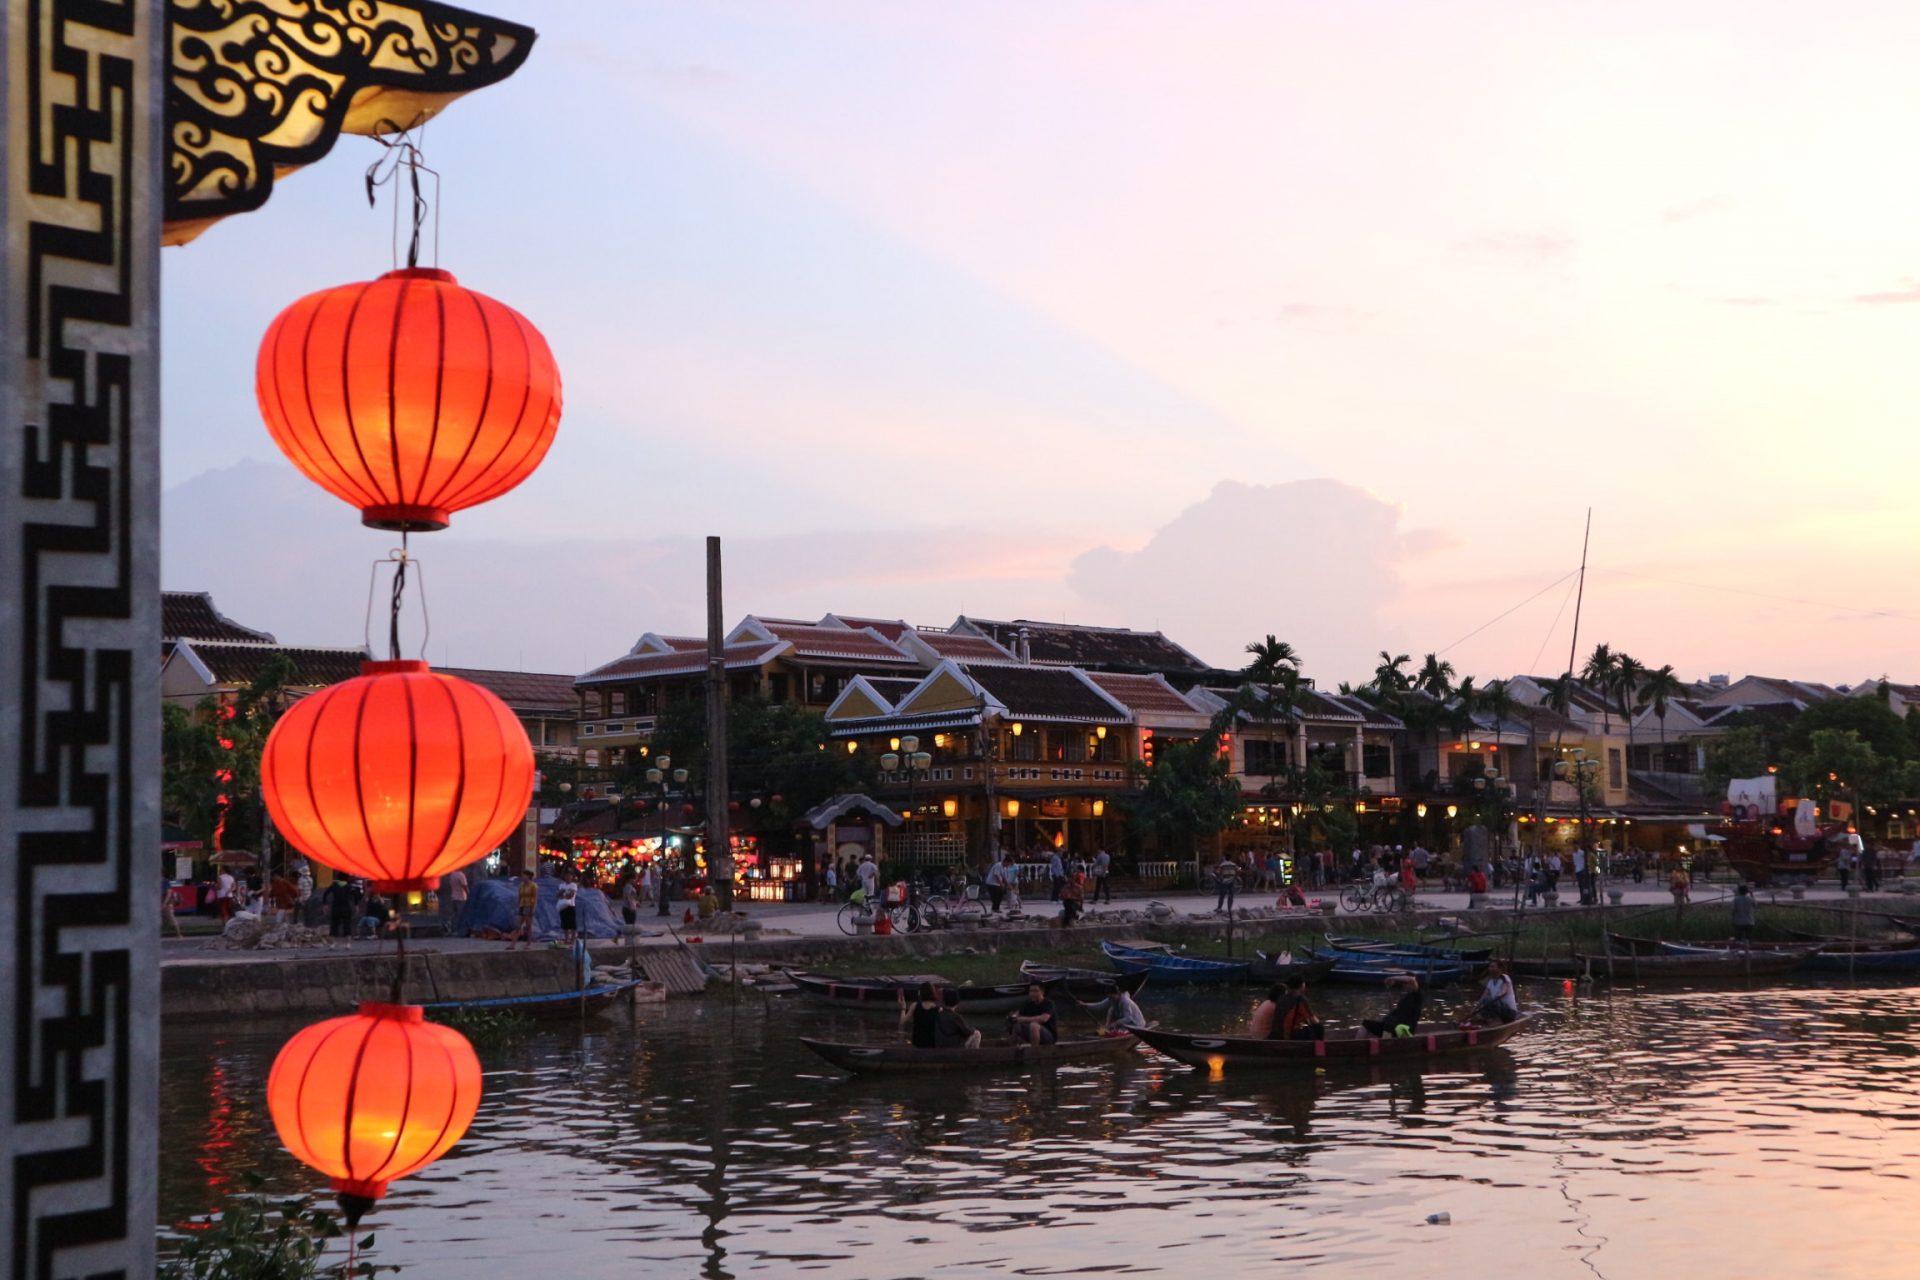 View of Hoi An ancient town from the central bridge